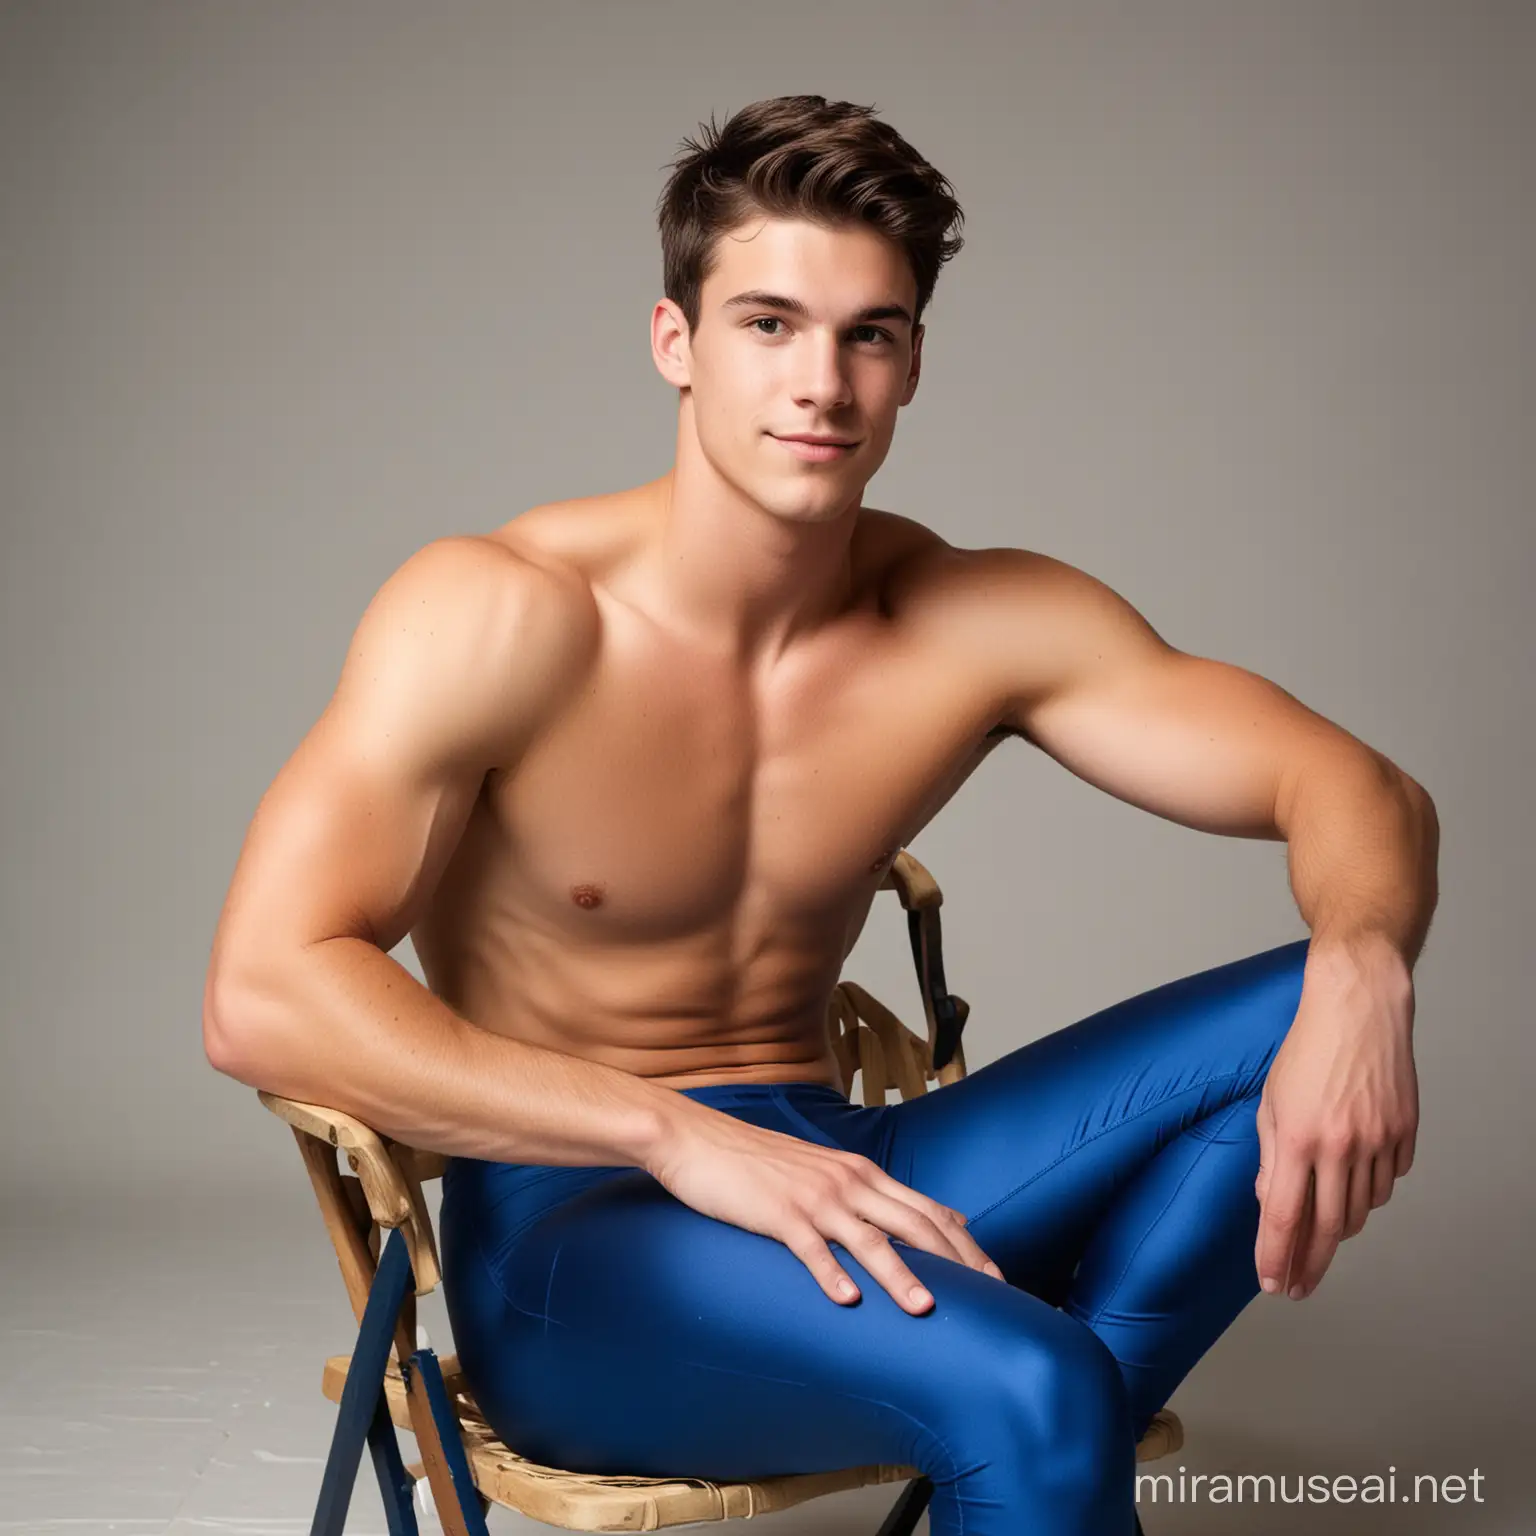 Handsome dorky shirtless 22 year old American male swimmer; with short chocolate hair, wearing long cobalt blue spandex leggings, sitting in chair